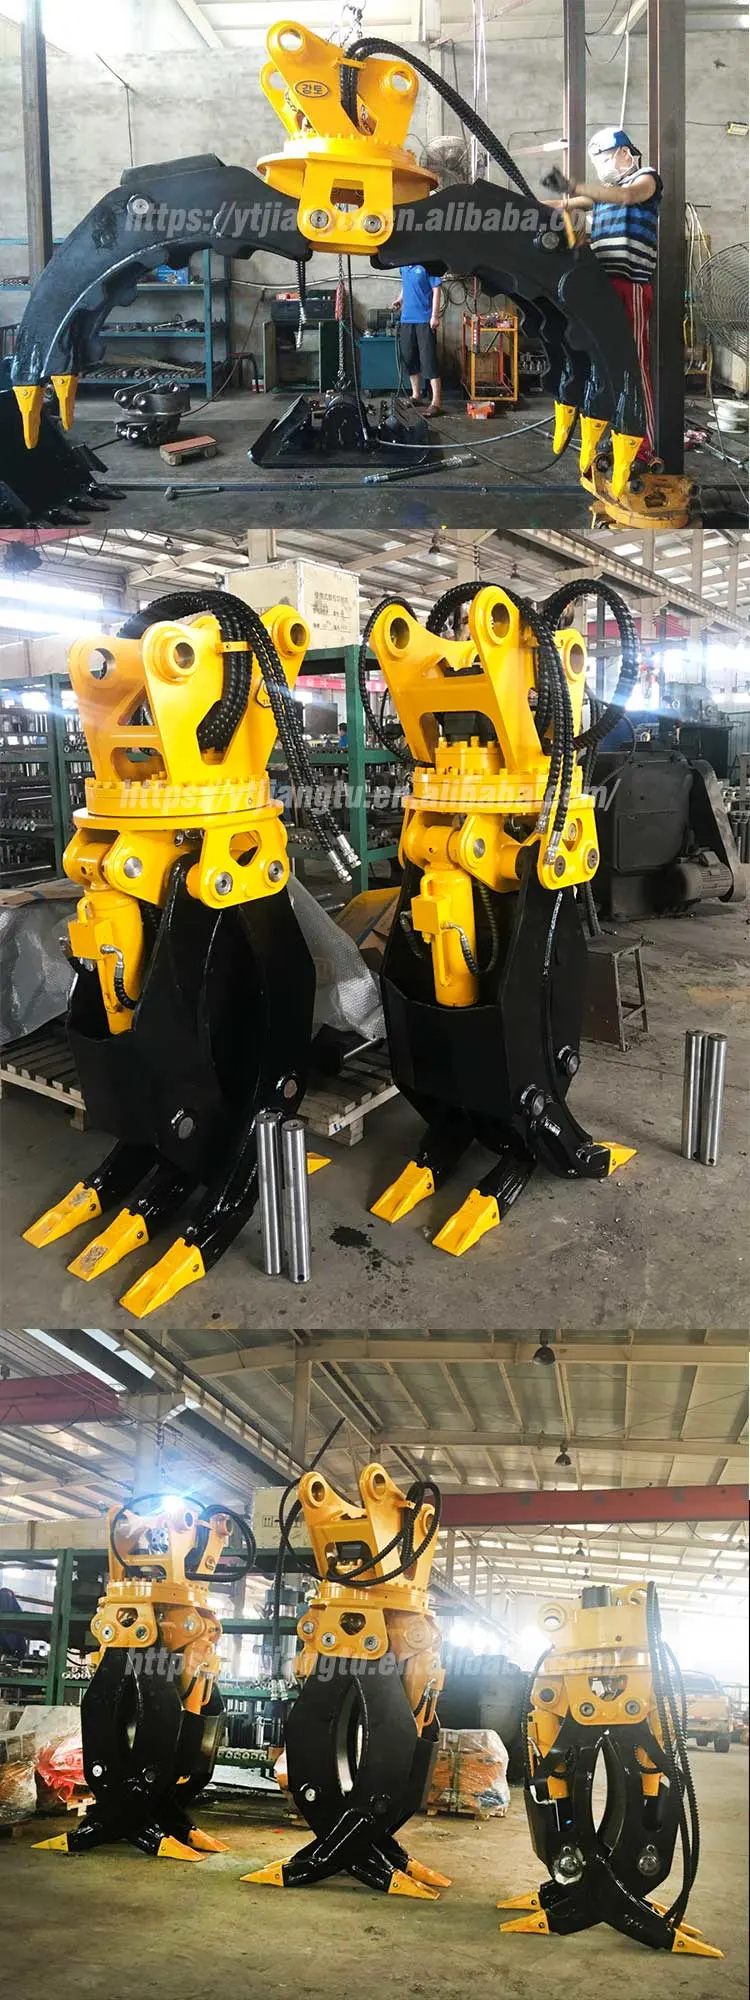 Hydraulic Grapple for Excavator